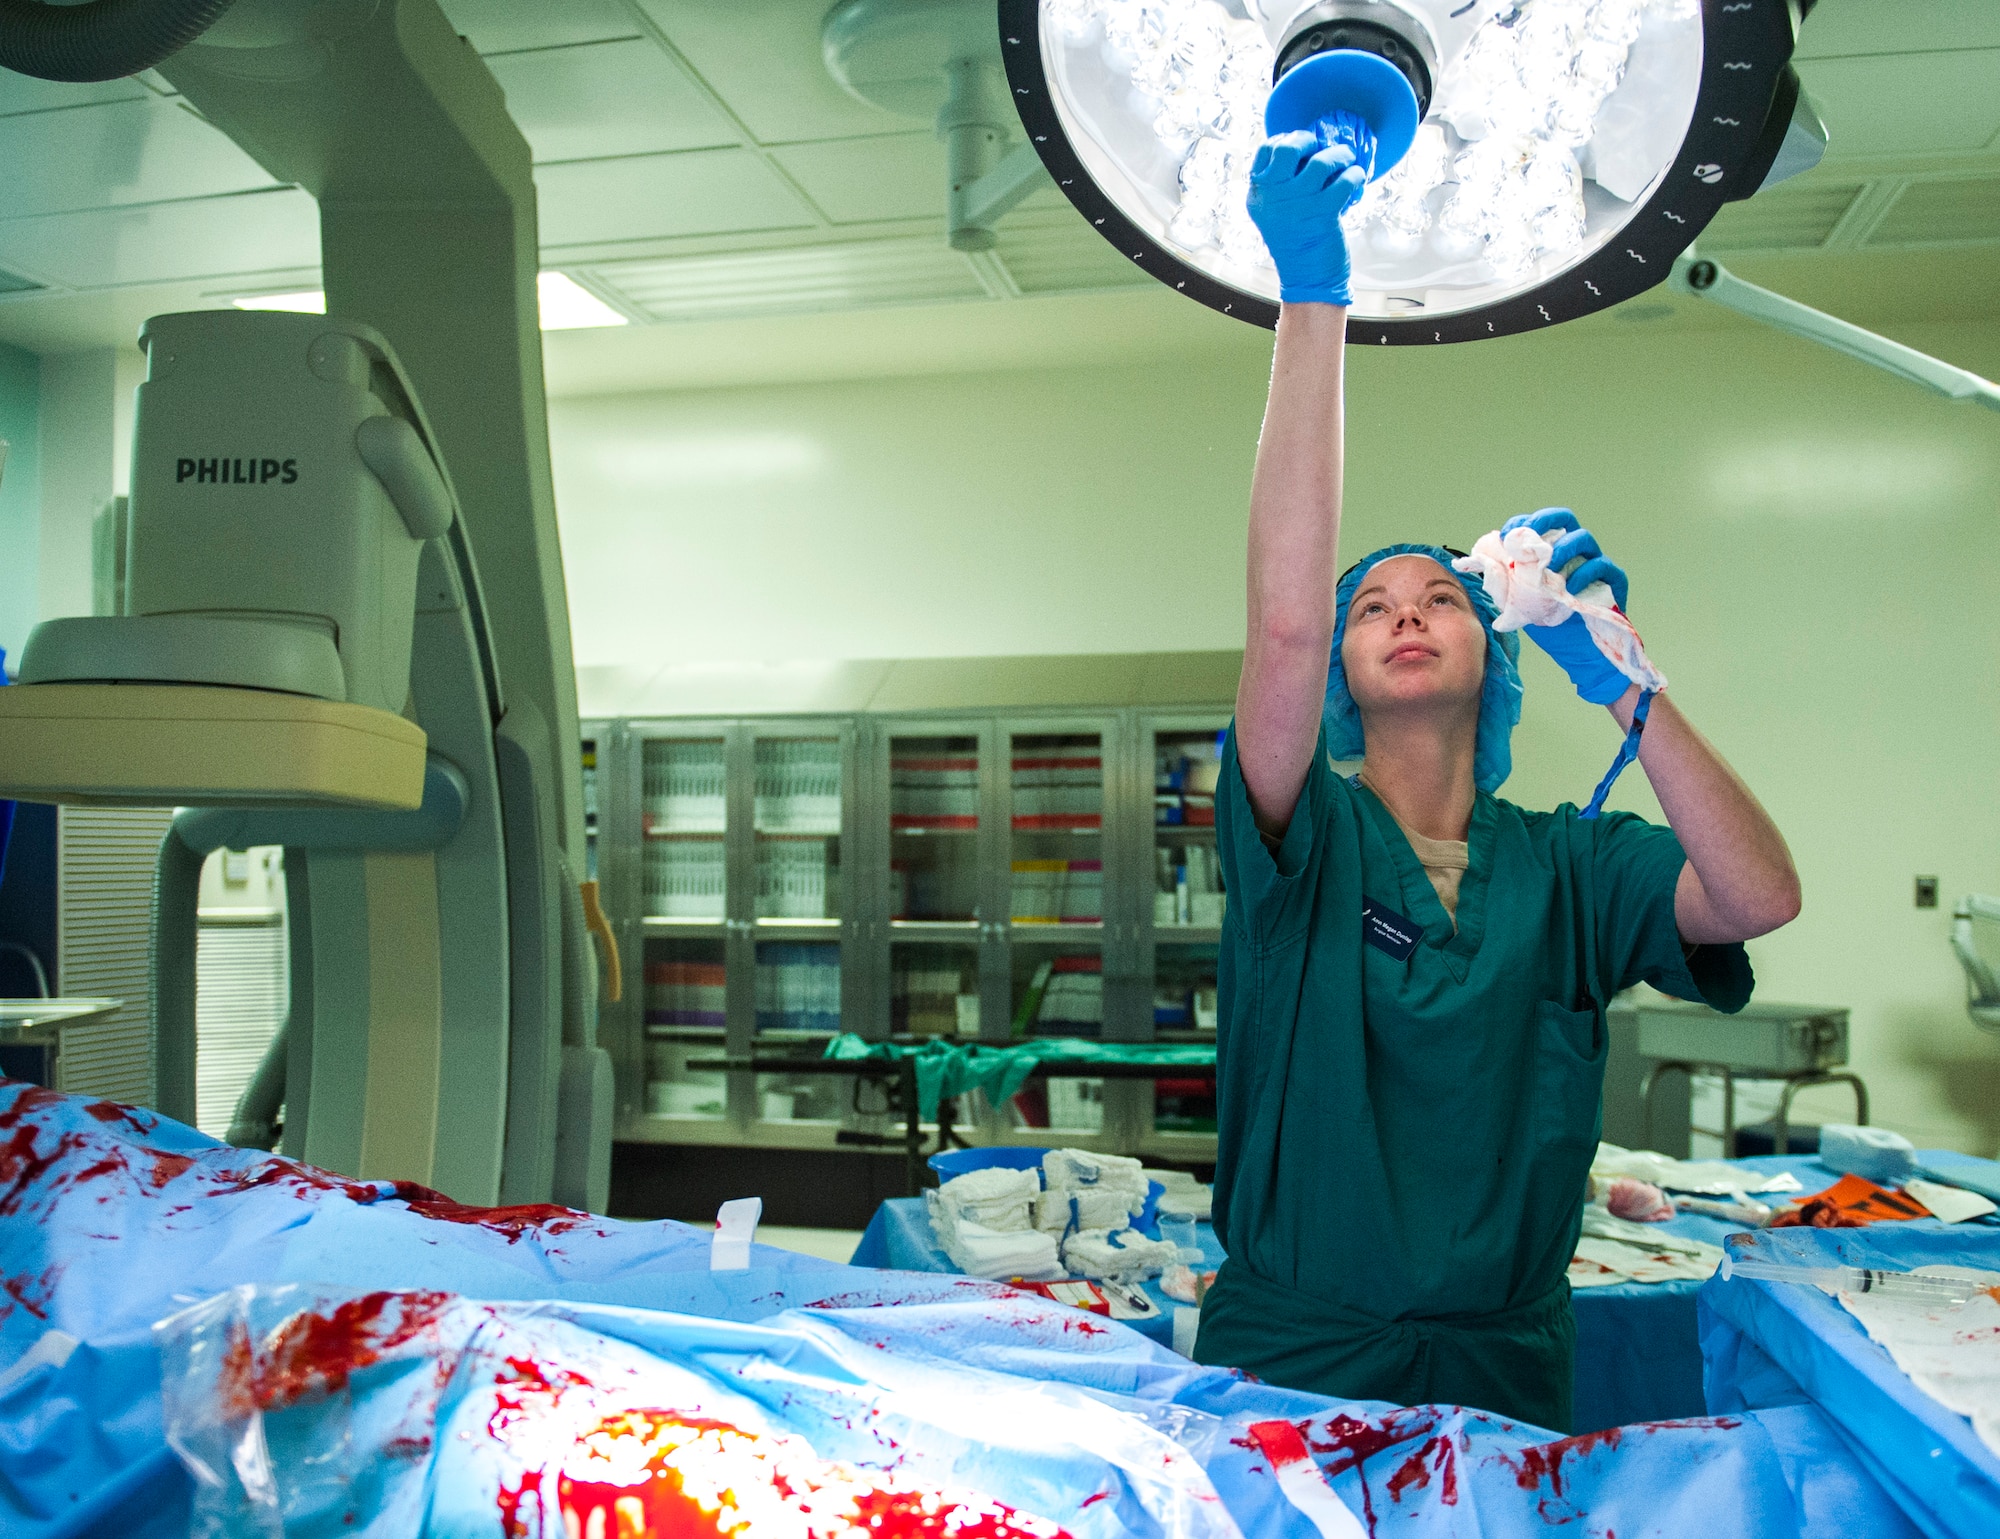 Airman Megan Dunlap, a surgical technician with the 96th Surgical Operations Squadron, removes the sterile covers from an operating room lamp after an exercise of a simulated amputation Jan. 14 at Eglin Air Force Base, Fla.  The 96th MDG surgical teams’ exercises simulate traumatic injuries commonly seen during deployments. The teamwork skills honed during exercises are also applied daily in the hospital’s operating rooms. (U.S. Force/Ilka Cole) 